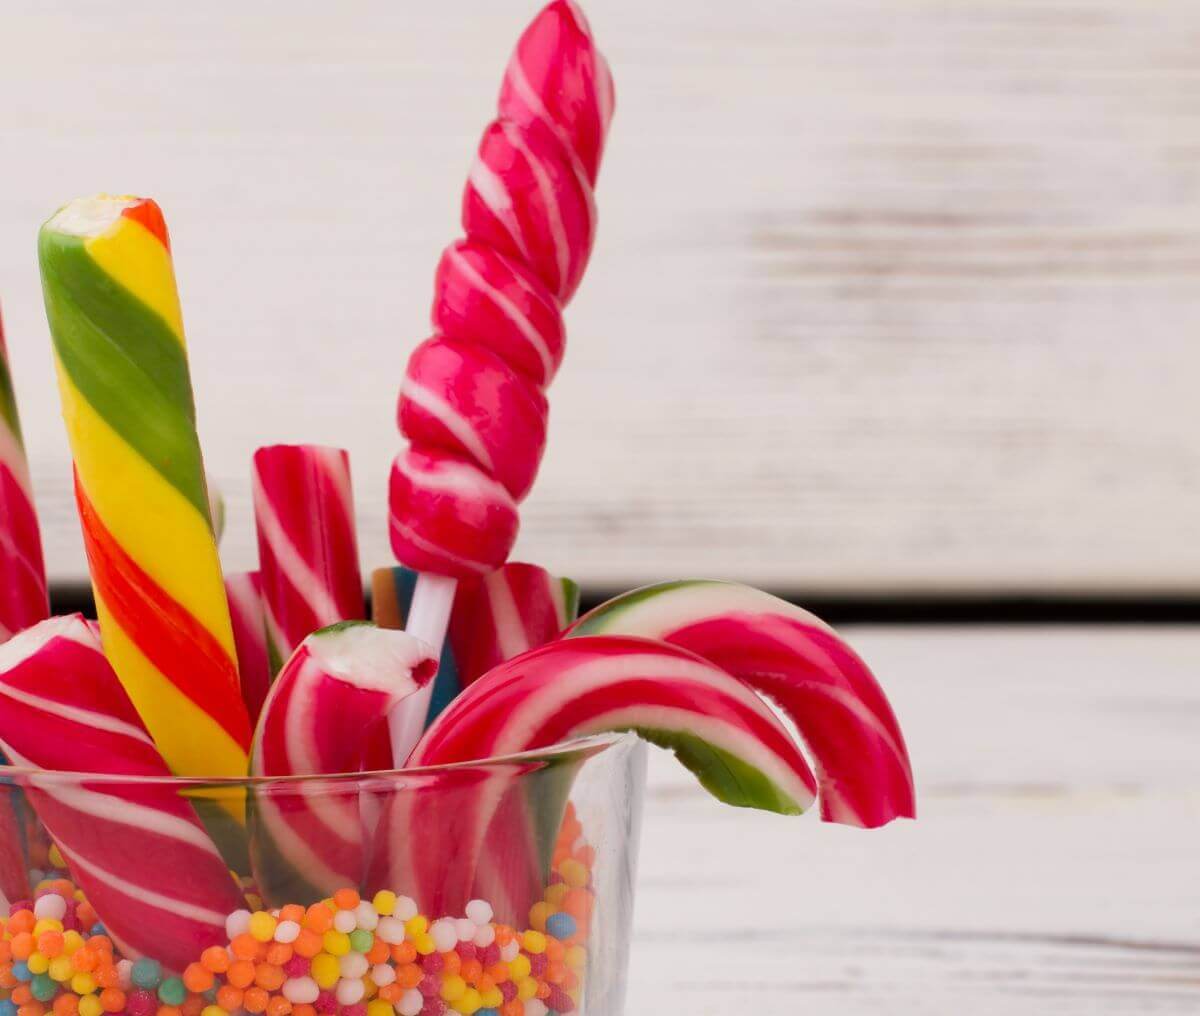 making a candy buffet heres how you can save money